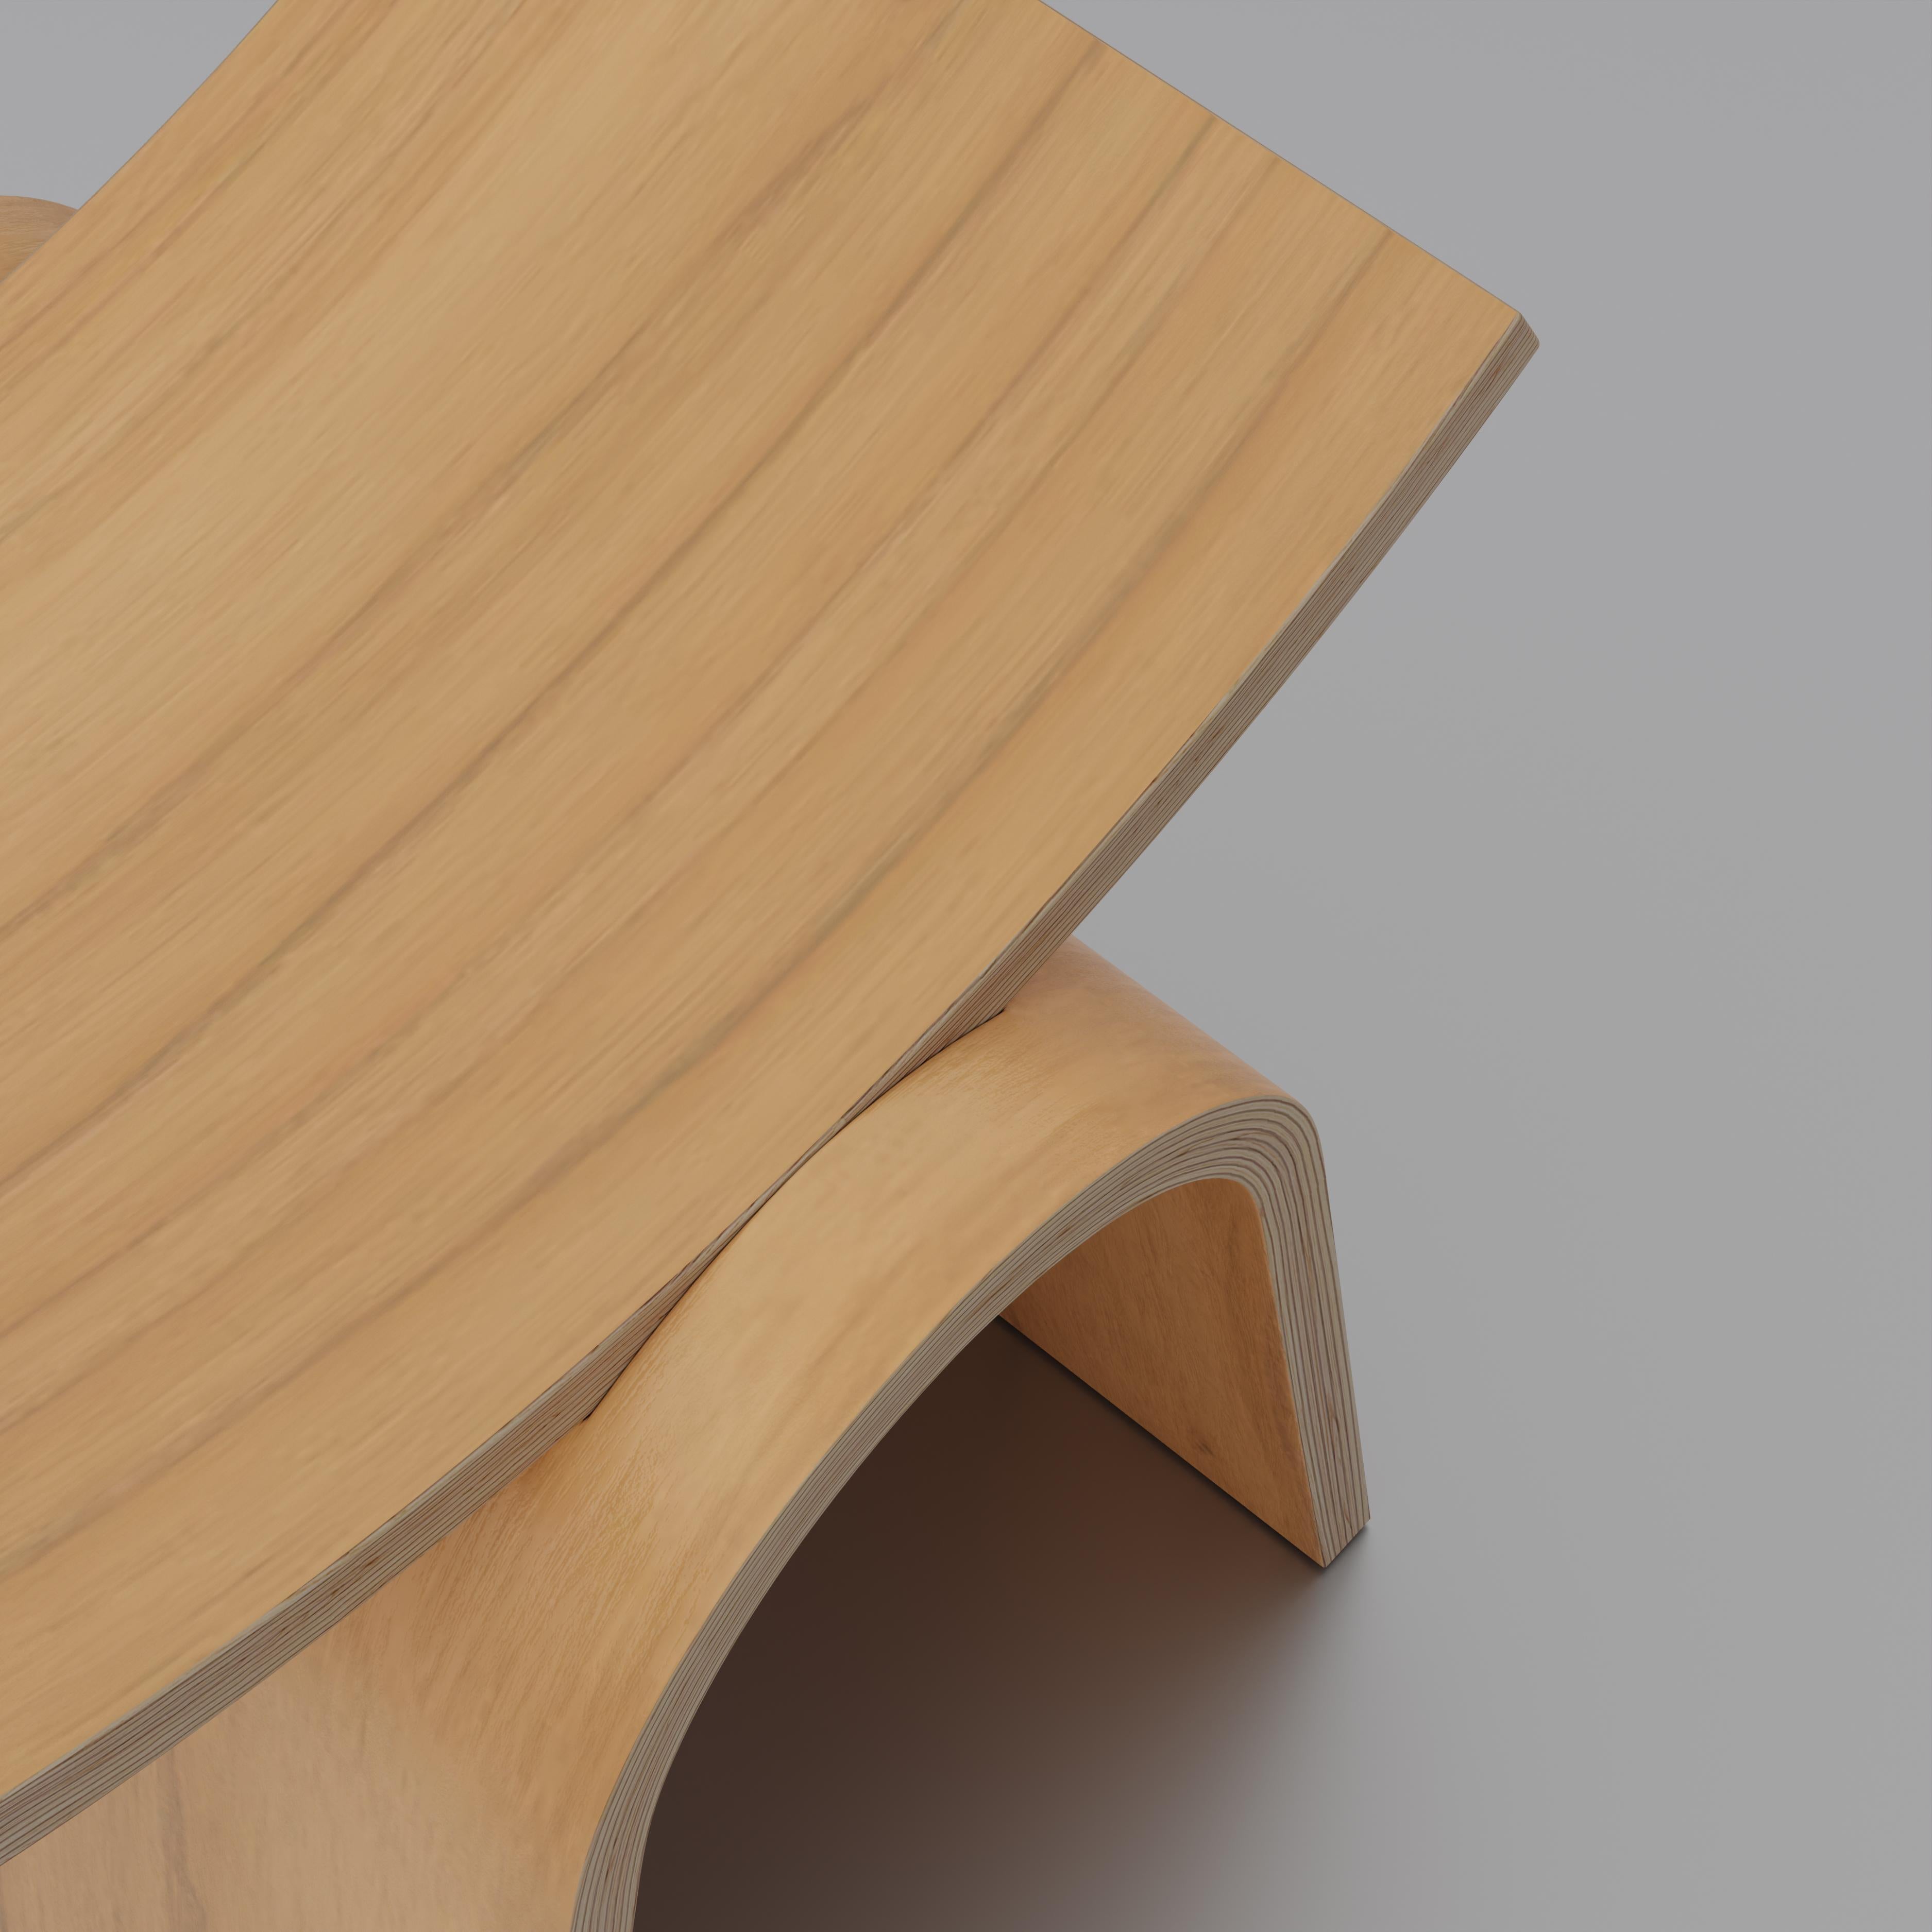 Fuji Wood Stool, Minimalist and Modern Inspiration from Brazil by Tiago Curioni For Sale 1